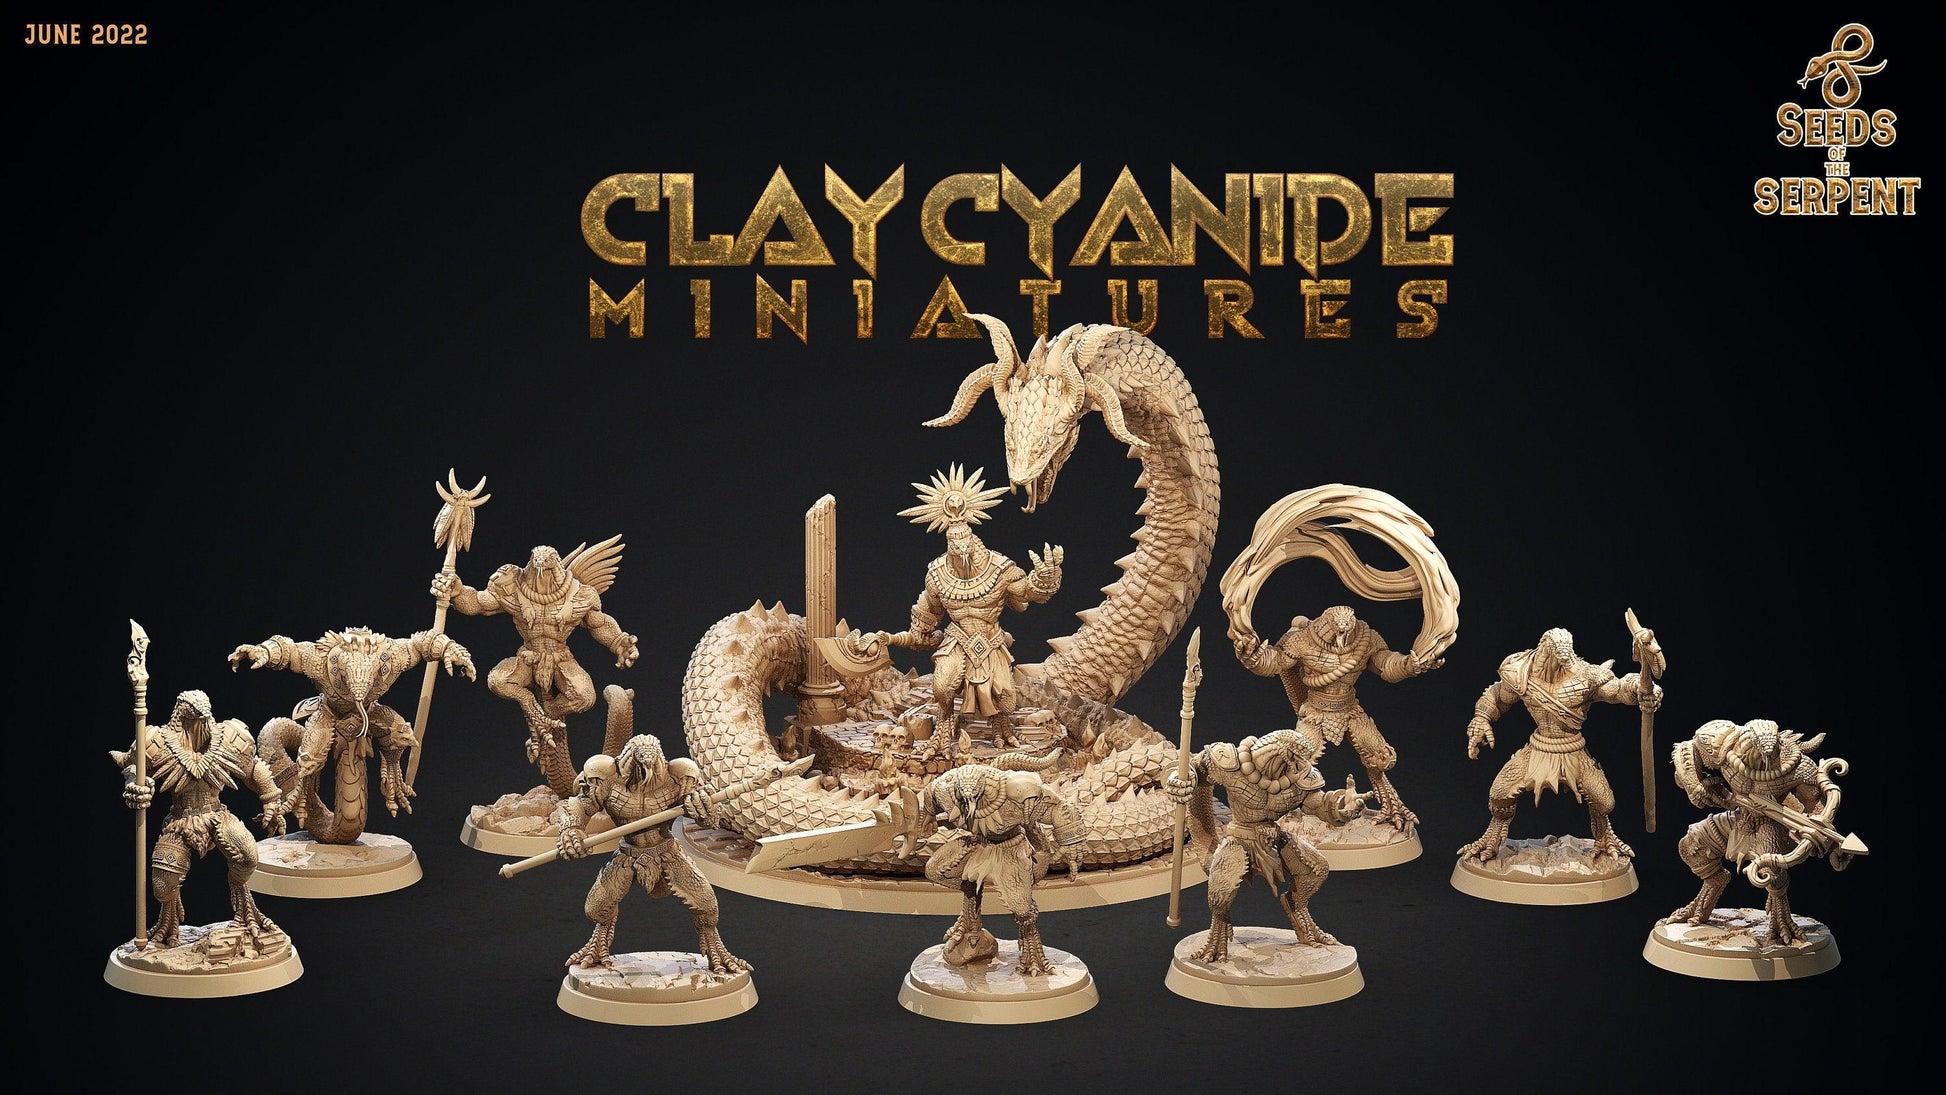 Yuan-Ti miniature Irad | Clay Cyanide | Seed of the Serpent | DnD Miniature | Dungeons and Dragons, DnD 5e yuan ti miniature - Plague Miniatures shop for DnD Miniatures